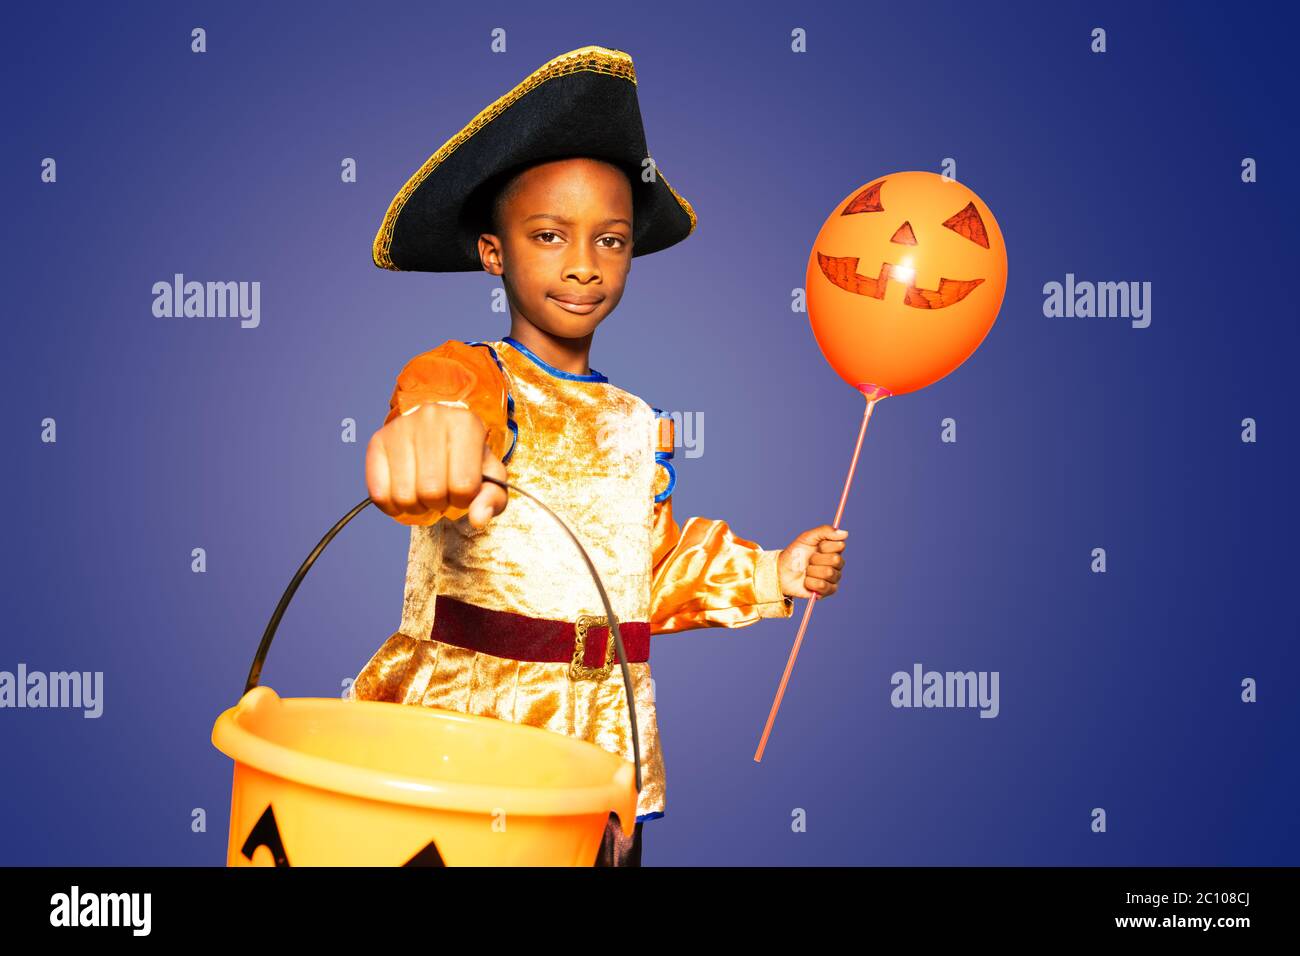 Serious portrait of a little boy with scary bucket for candies and in Halloween costume holding orange balloon Stock Photo